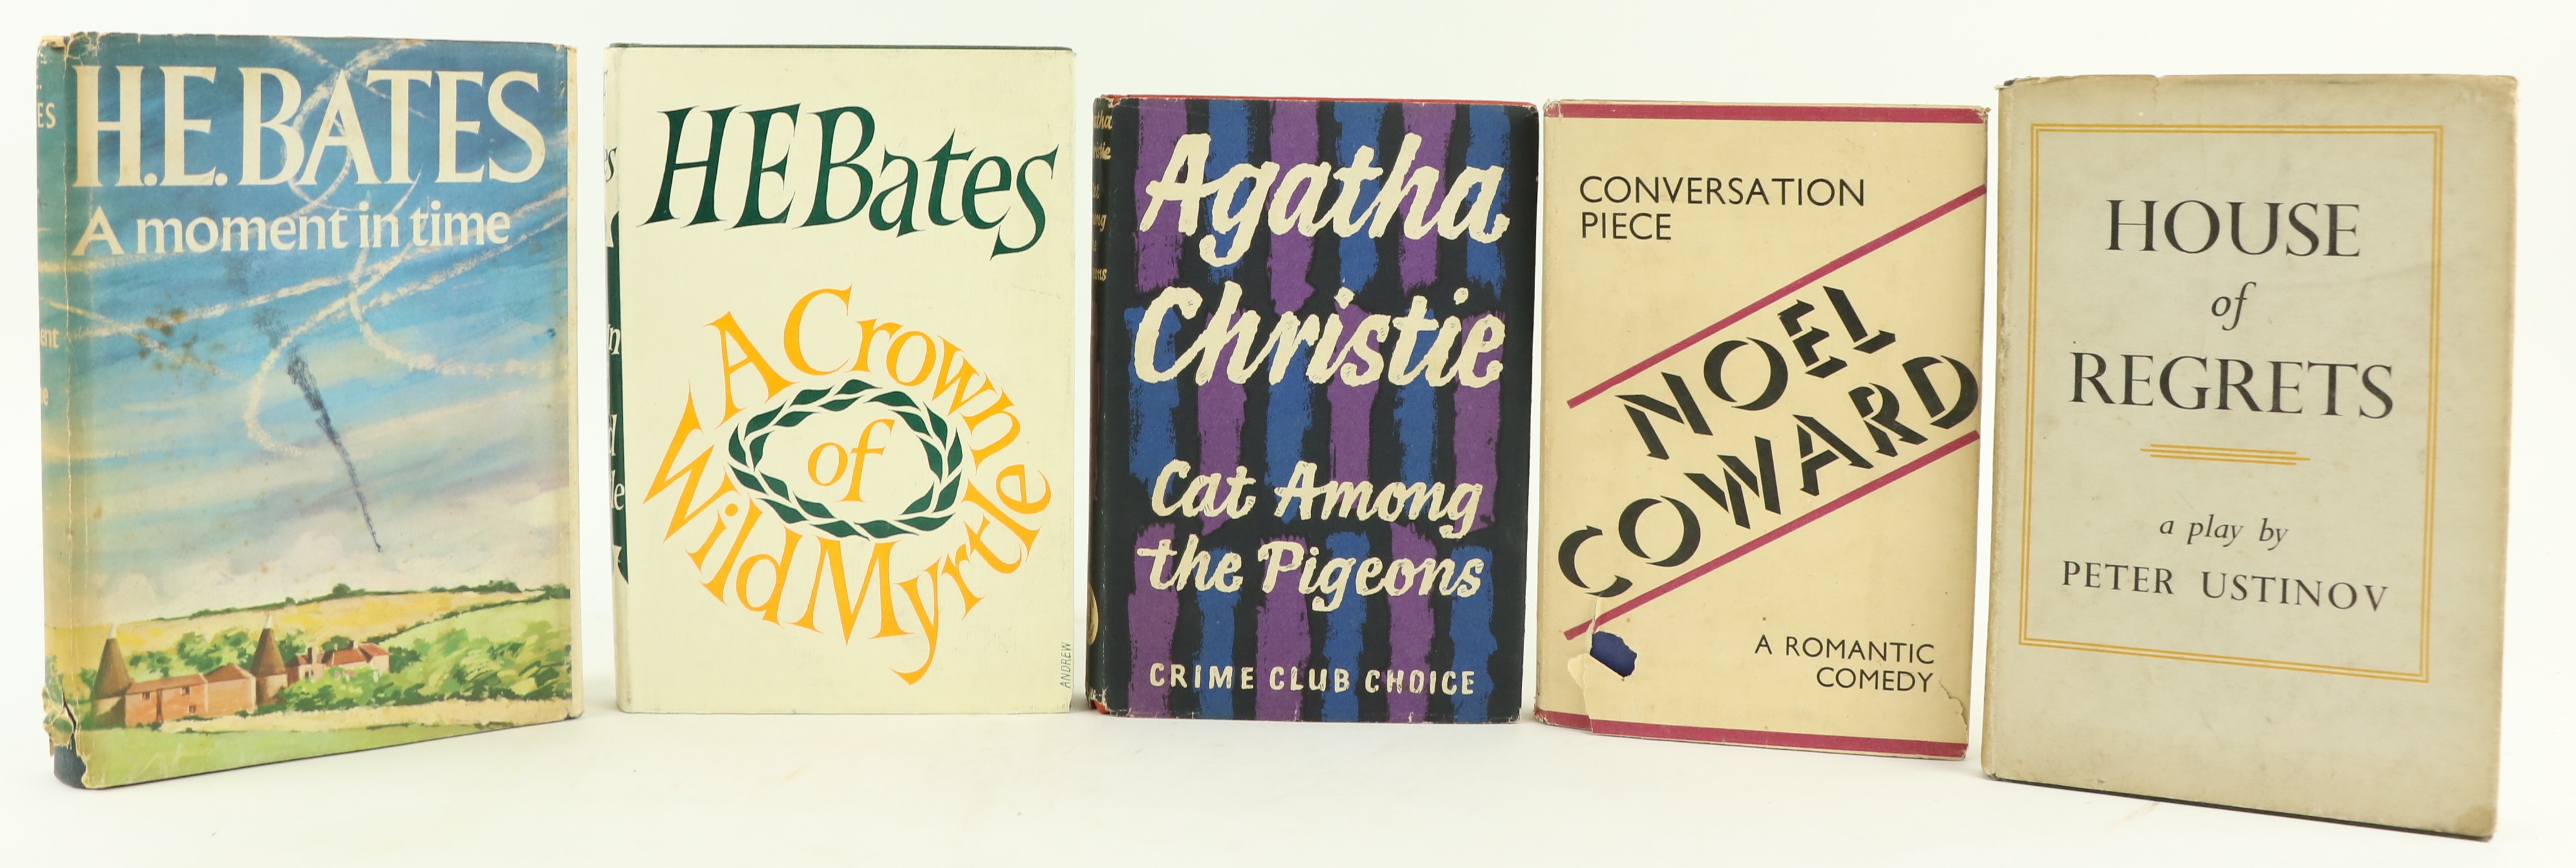 Christie (Agatha) Cat Among the Pigeons, 8vo L. (Crime by Collins) 1959, First Edn., red cloth, d.